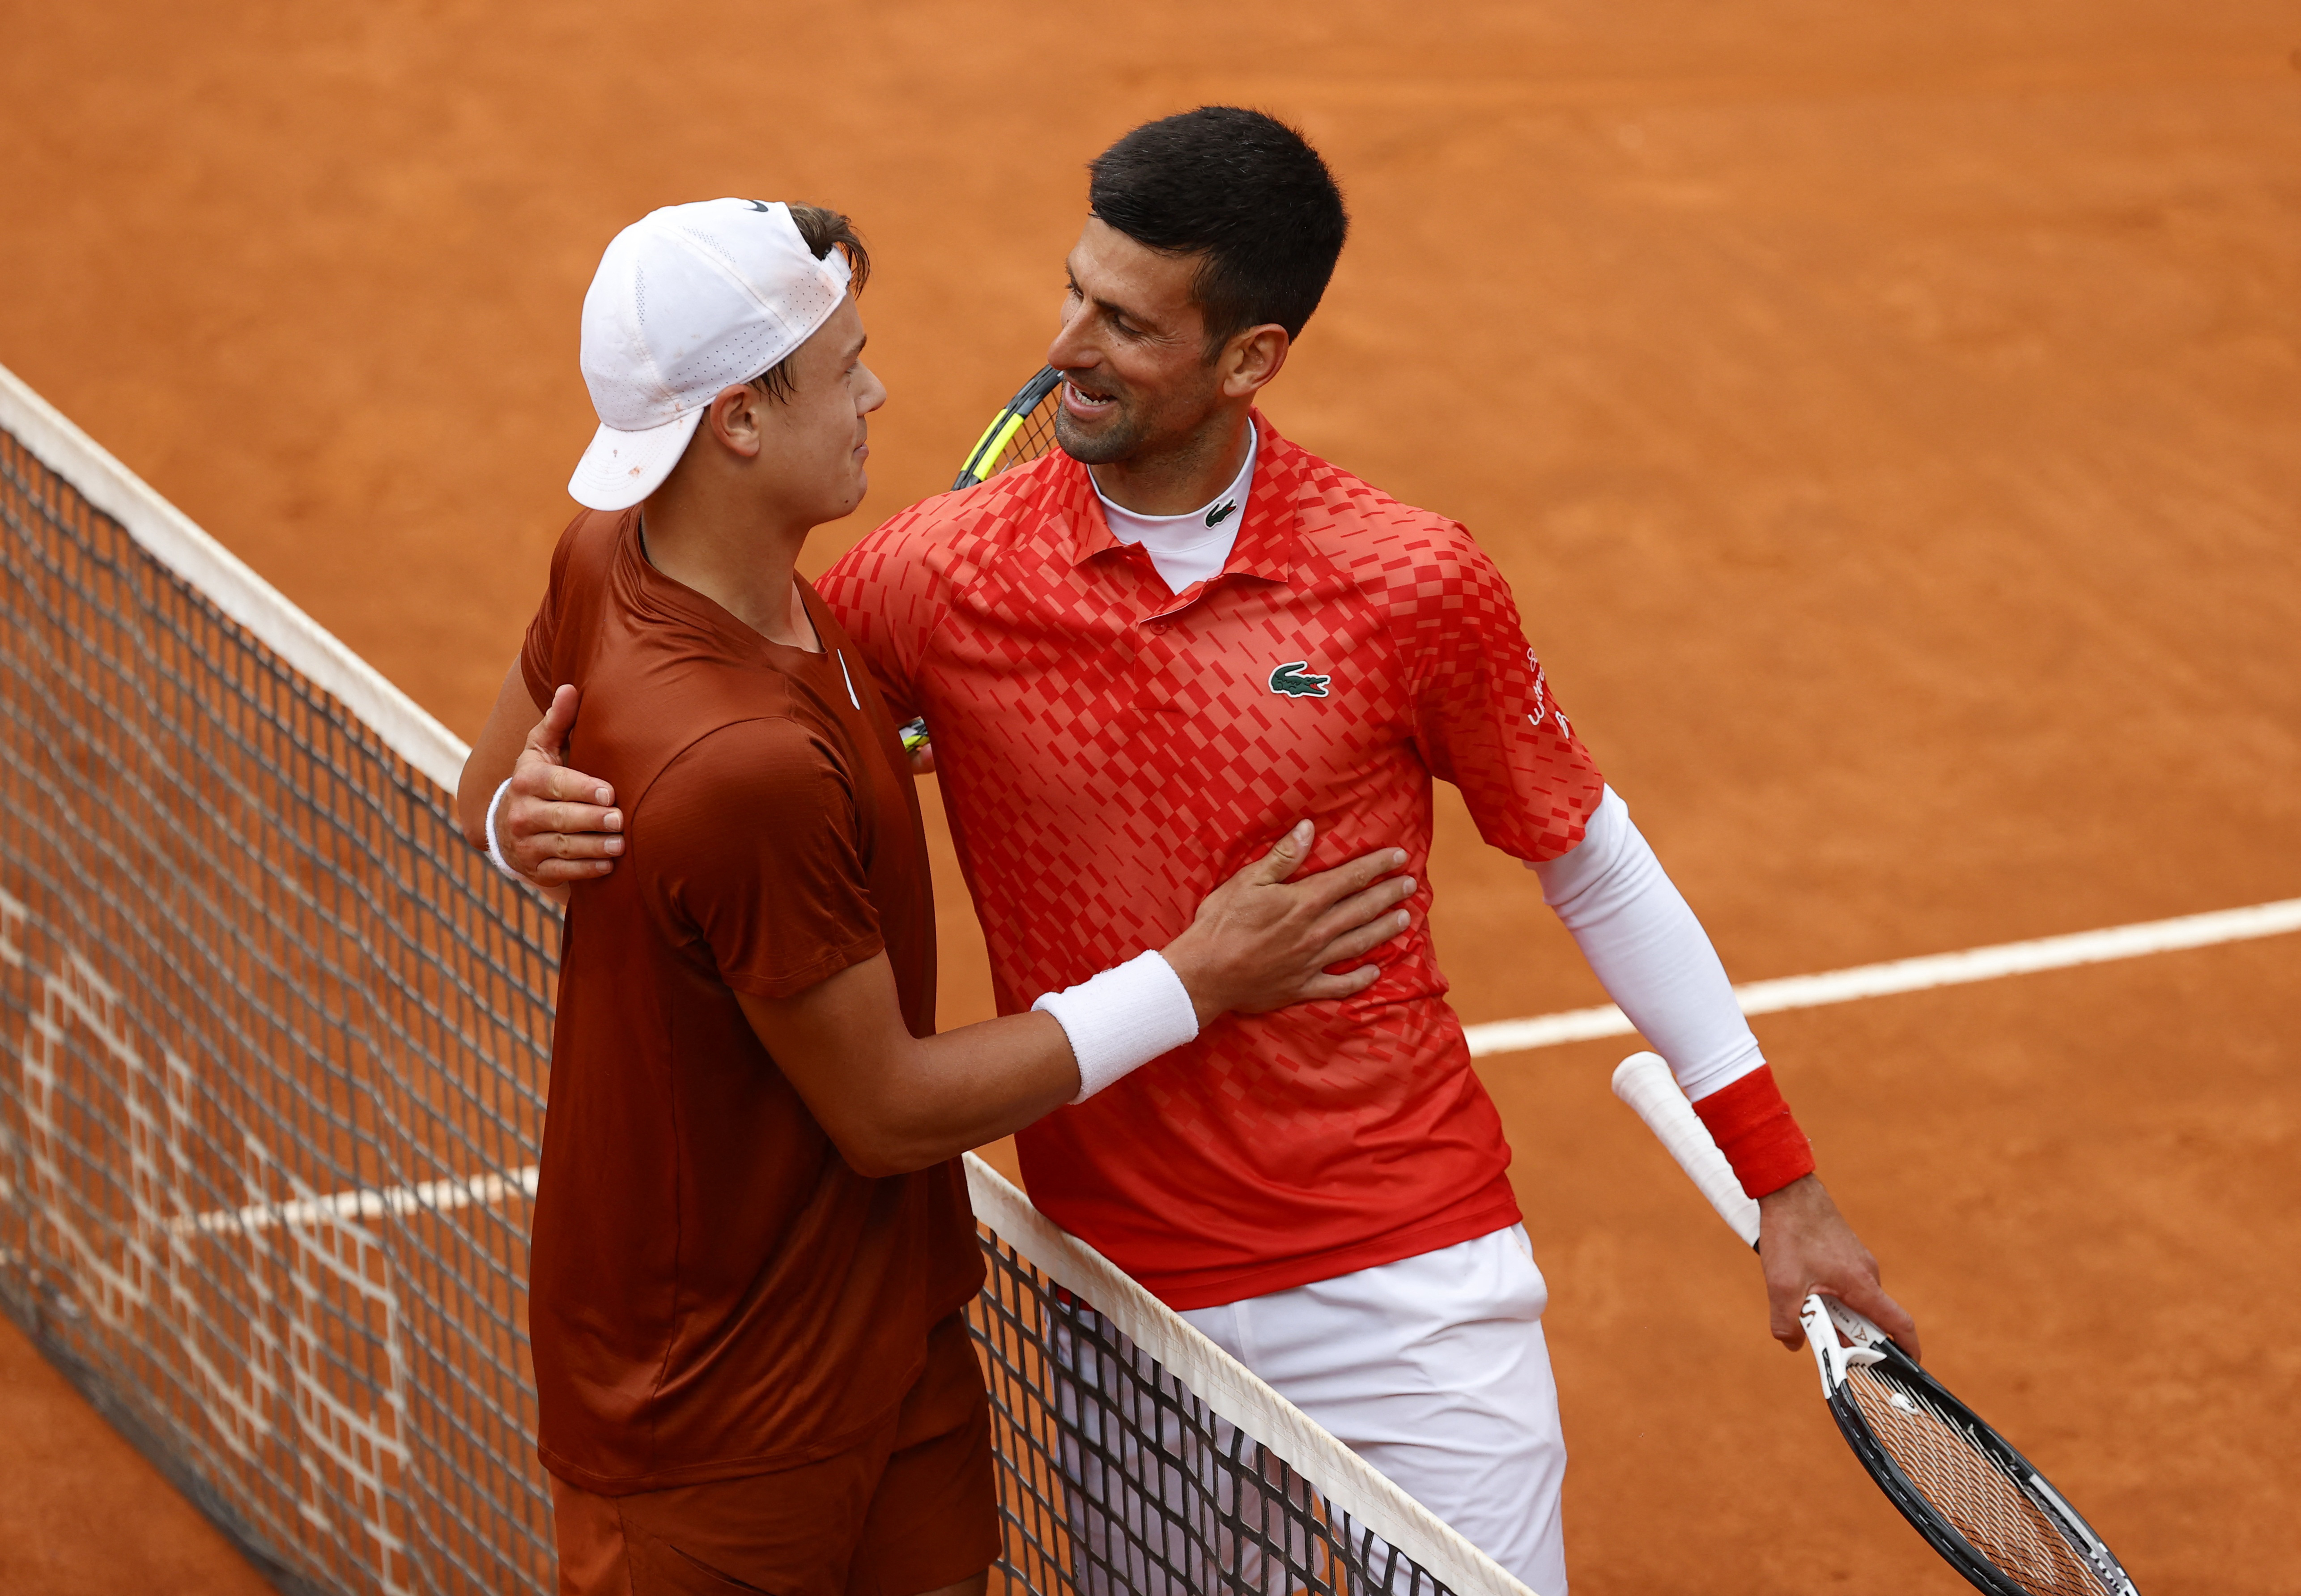 Djokovic says new generation has arrived after Rome quarter-final exit Reuters